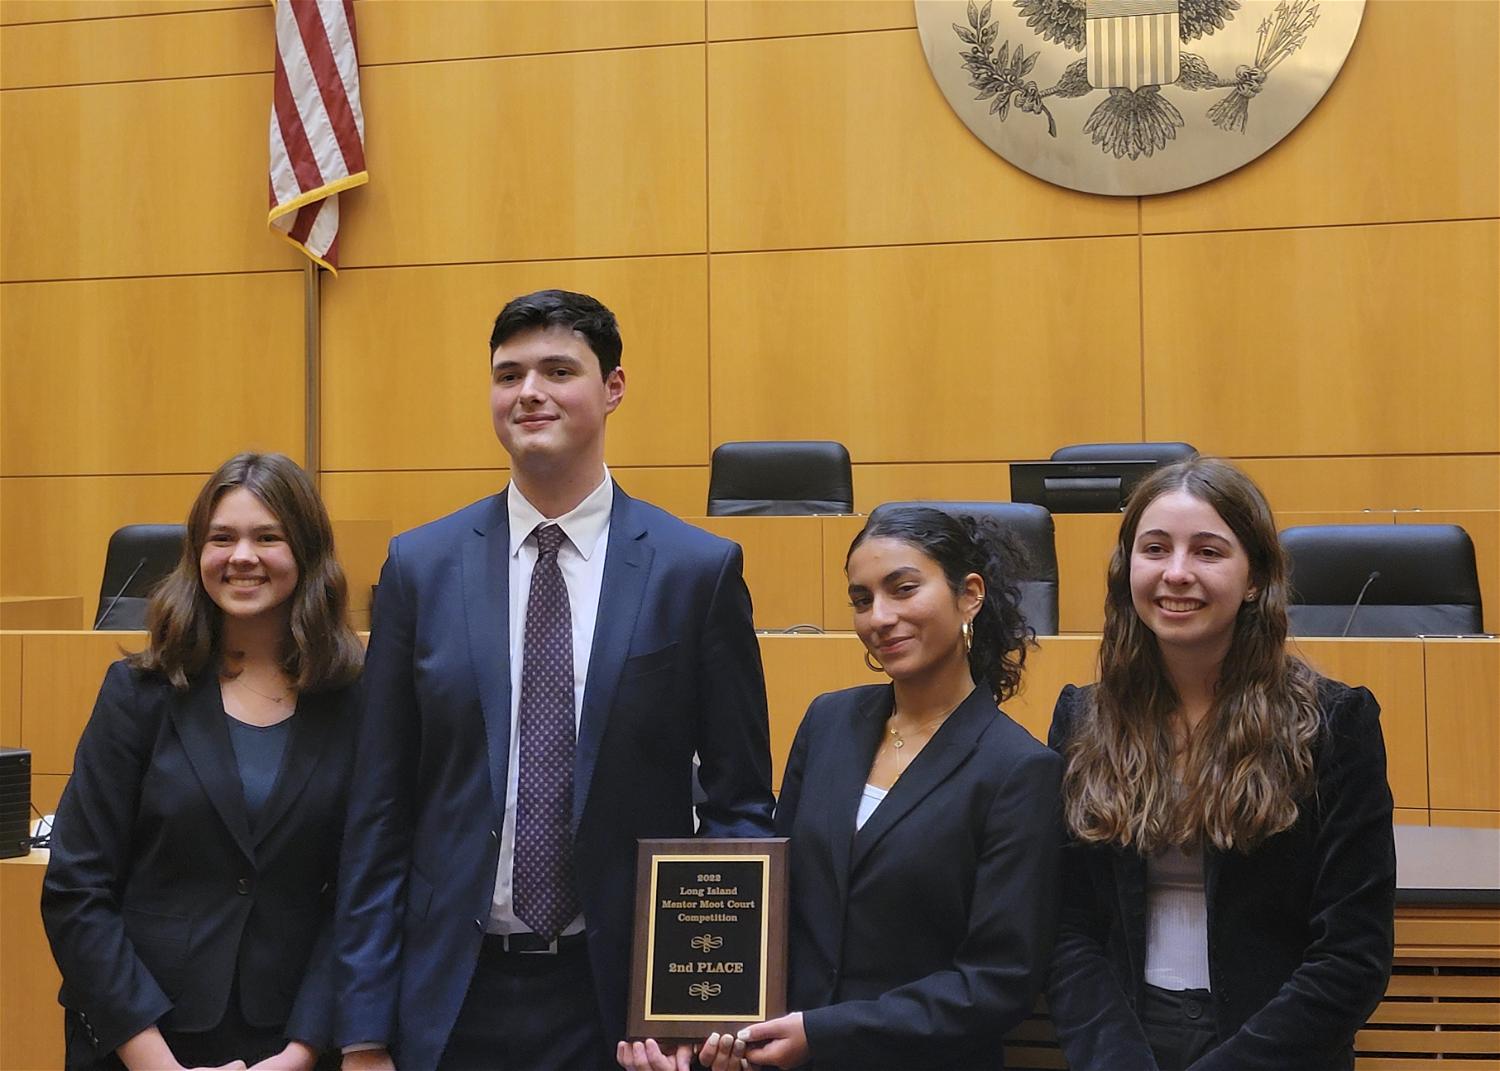 Northport High School students (from left to right) Kailey Ciszek, Sam Rosenfeld-McMahon, Ava Mir and Molly Zambri attended the Long Island Moot Court Tournament sponsored by the United States District Court in Central Islip. Photo courtesy of the Northport-East Northport UFSD.